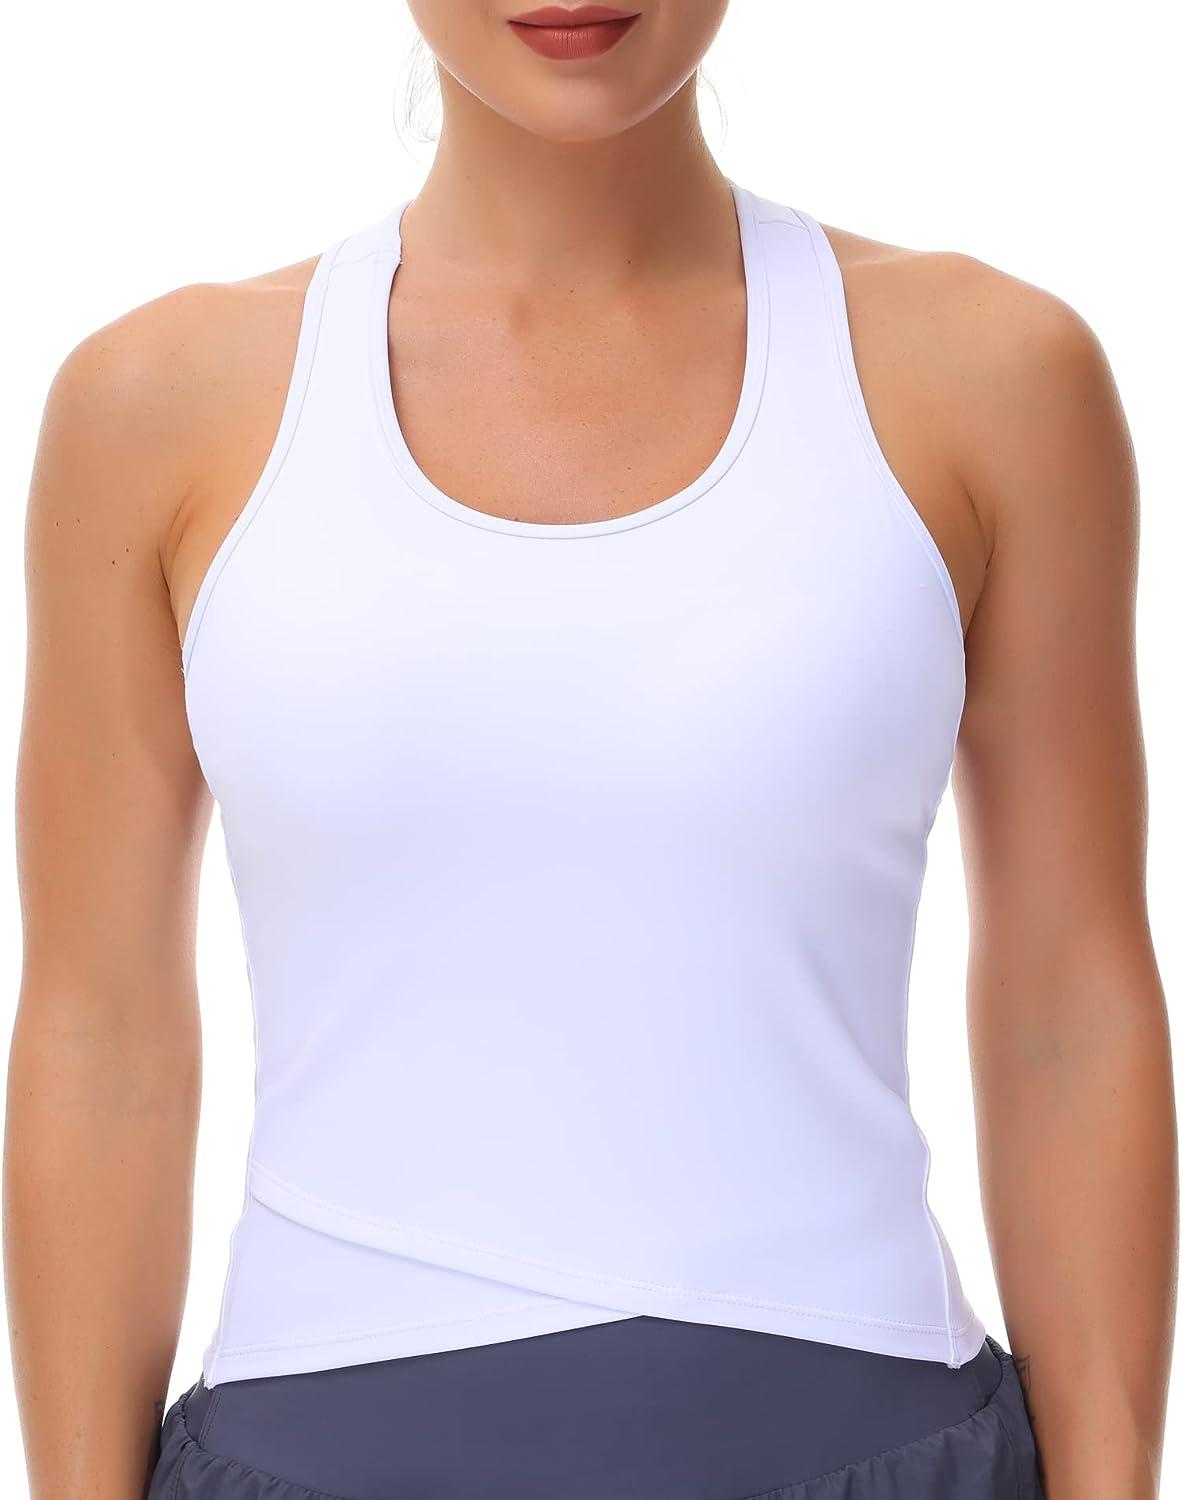 Womens Racerback Workout Tank Tops with Built in Bra Sleeveless Running  Yoga Shirts Slim Fit Small White